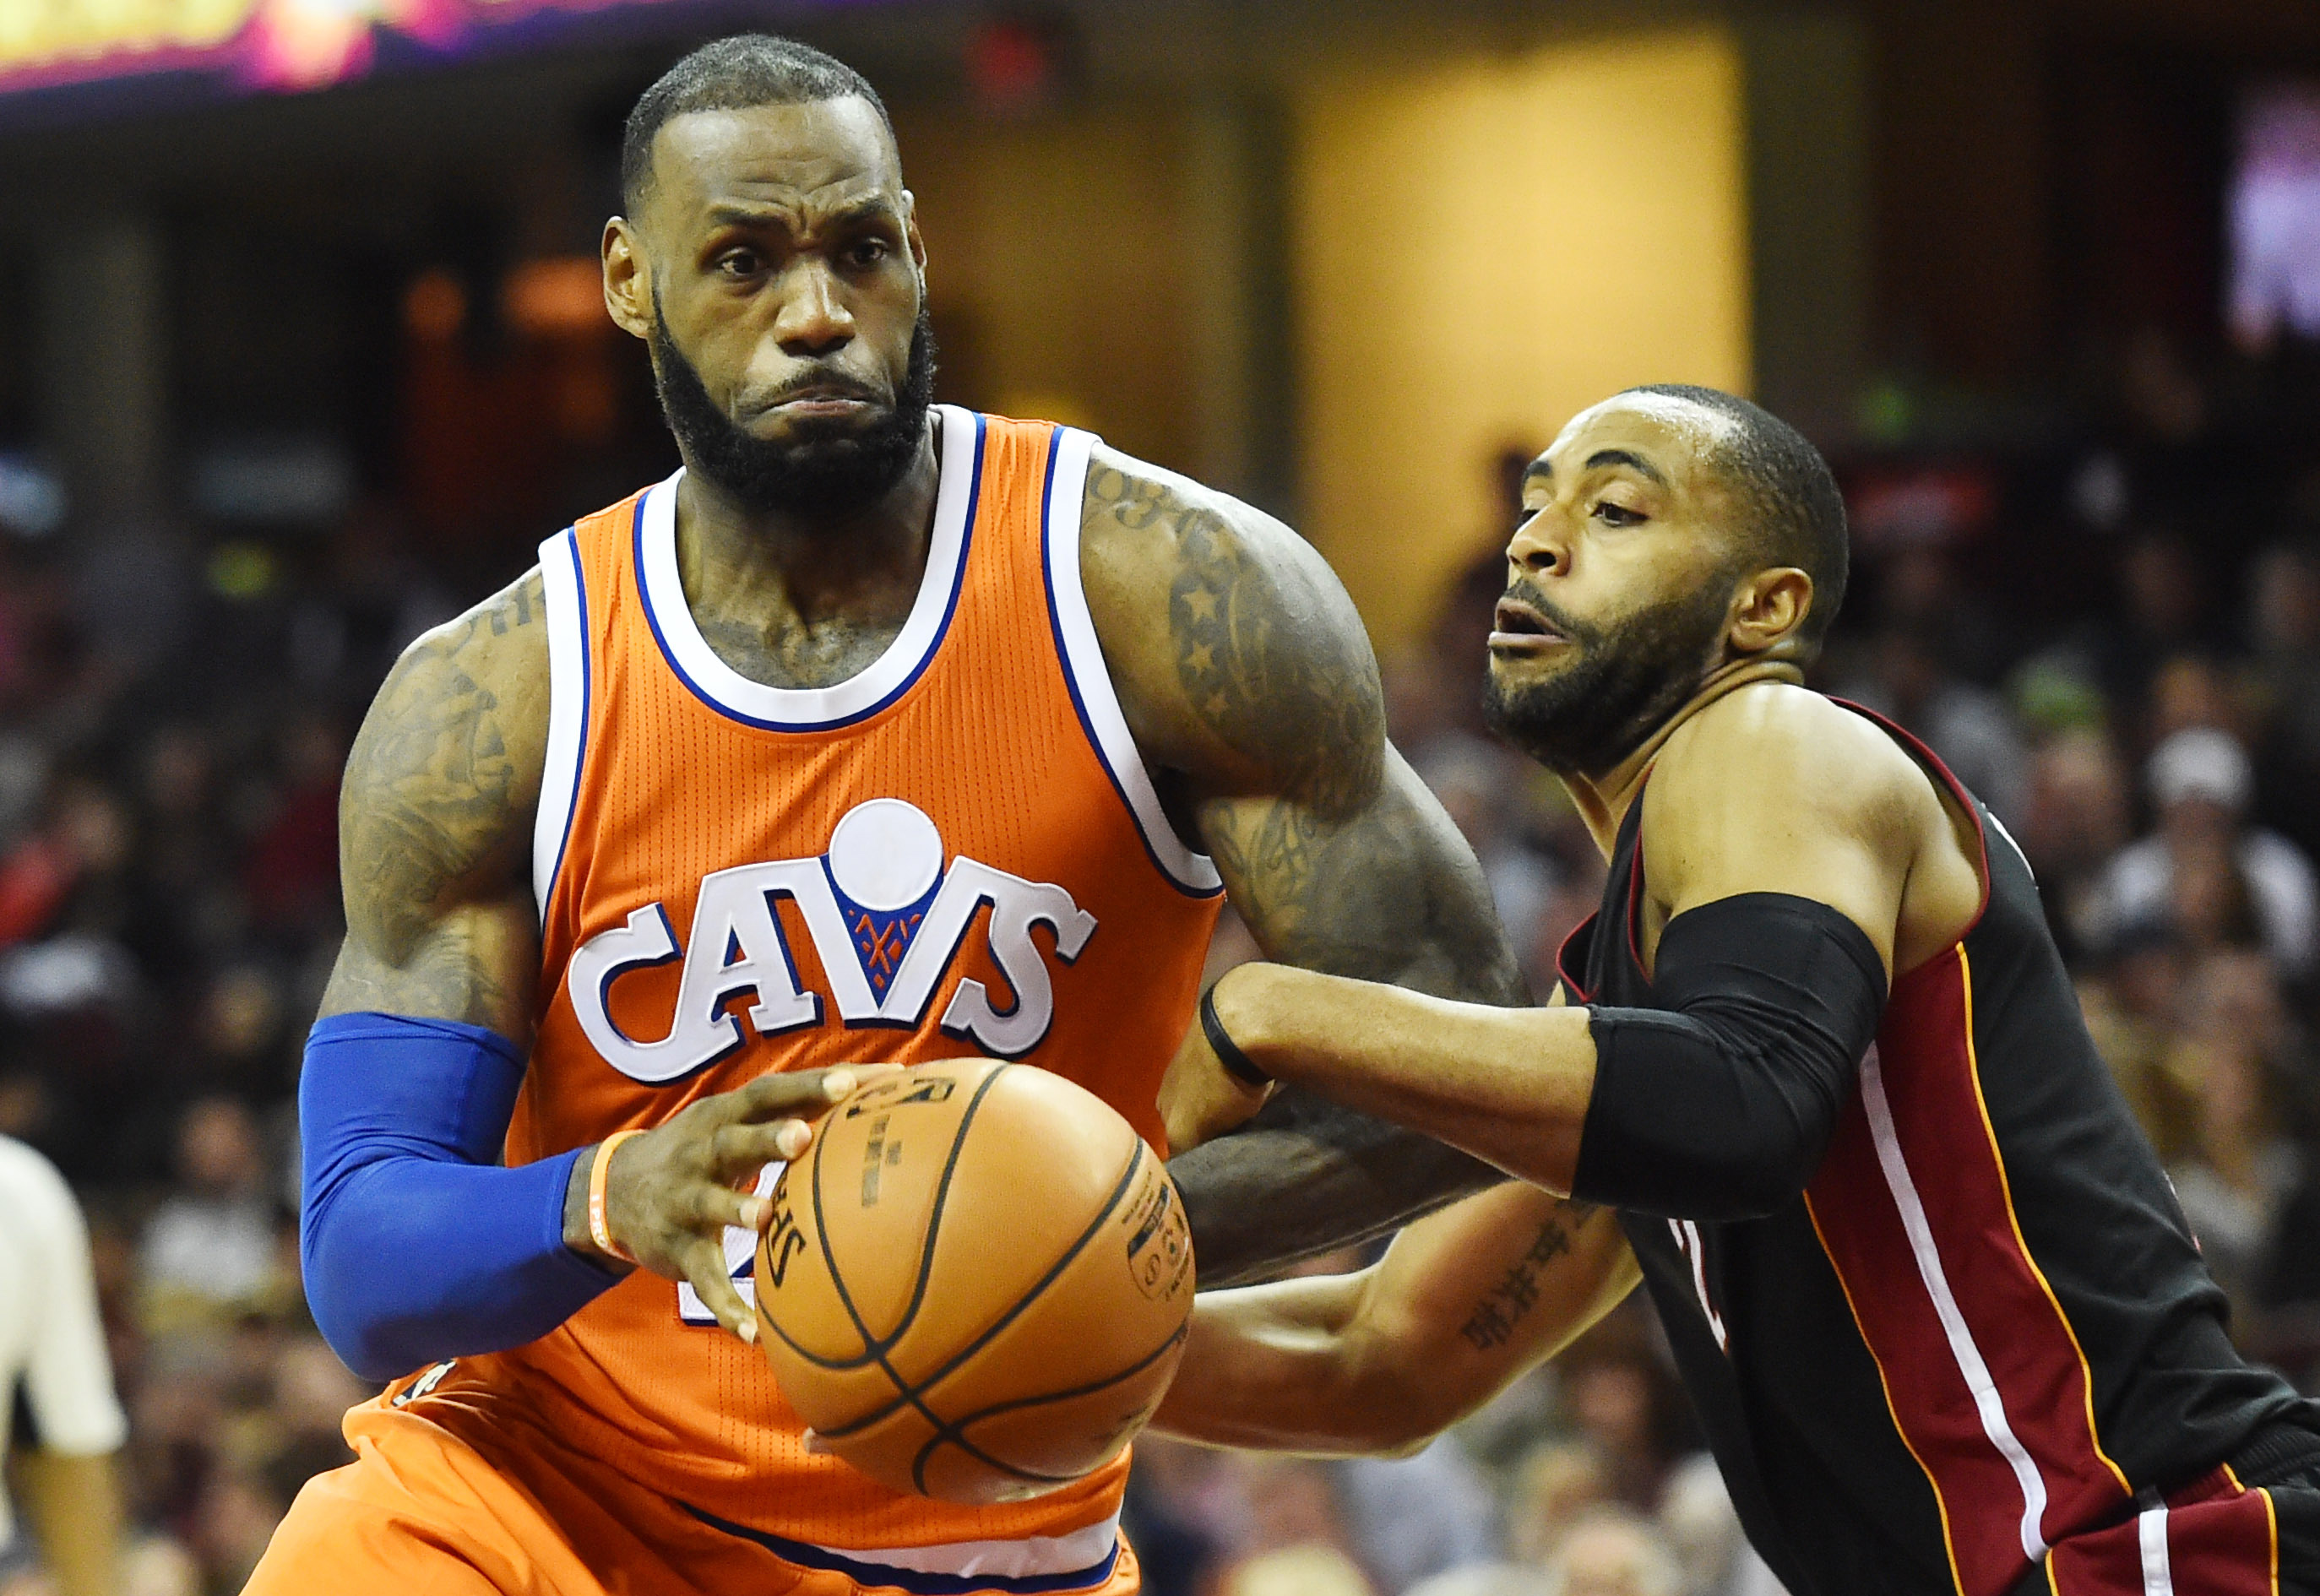 Cavaliers at Heat live stream: How to watch online